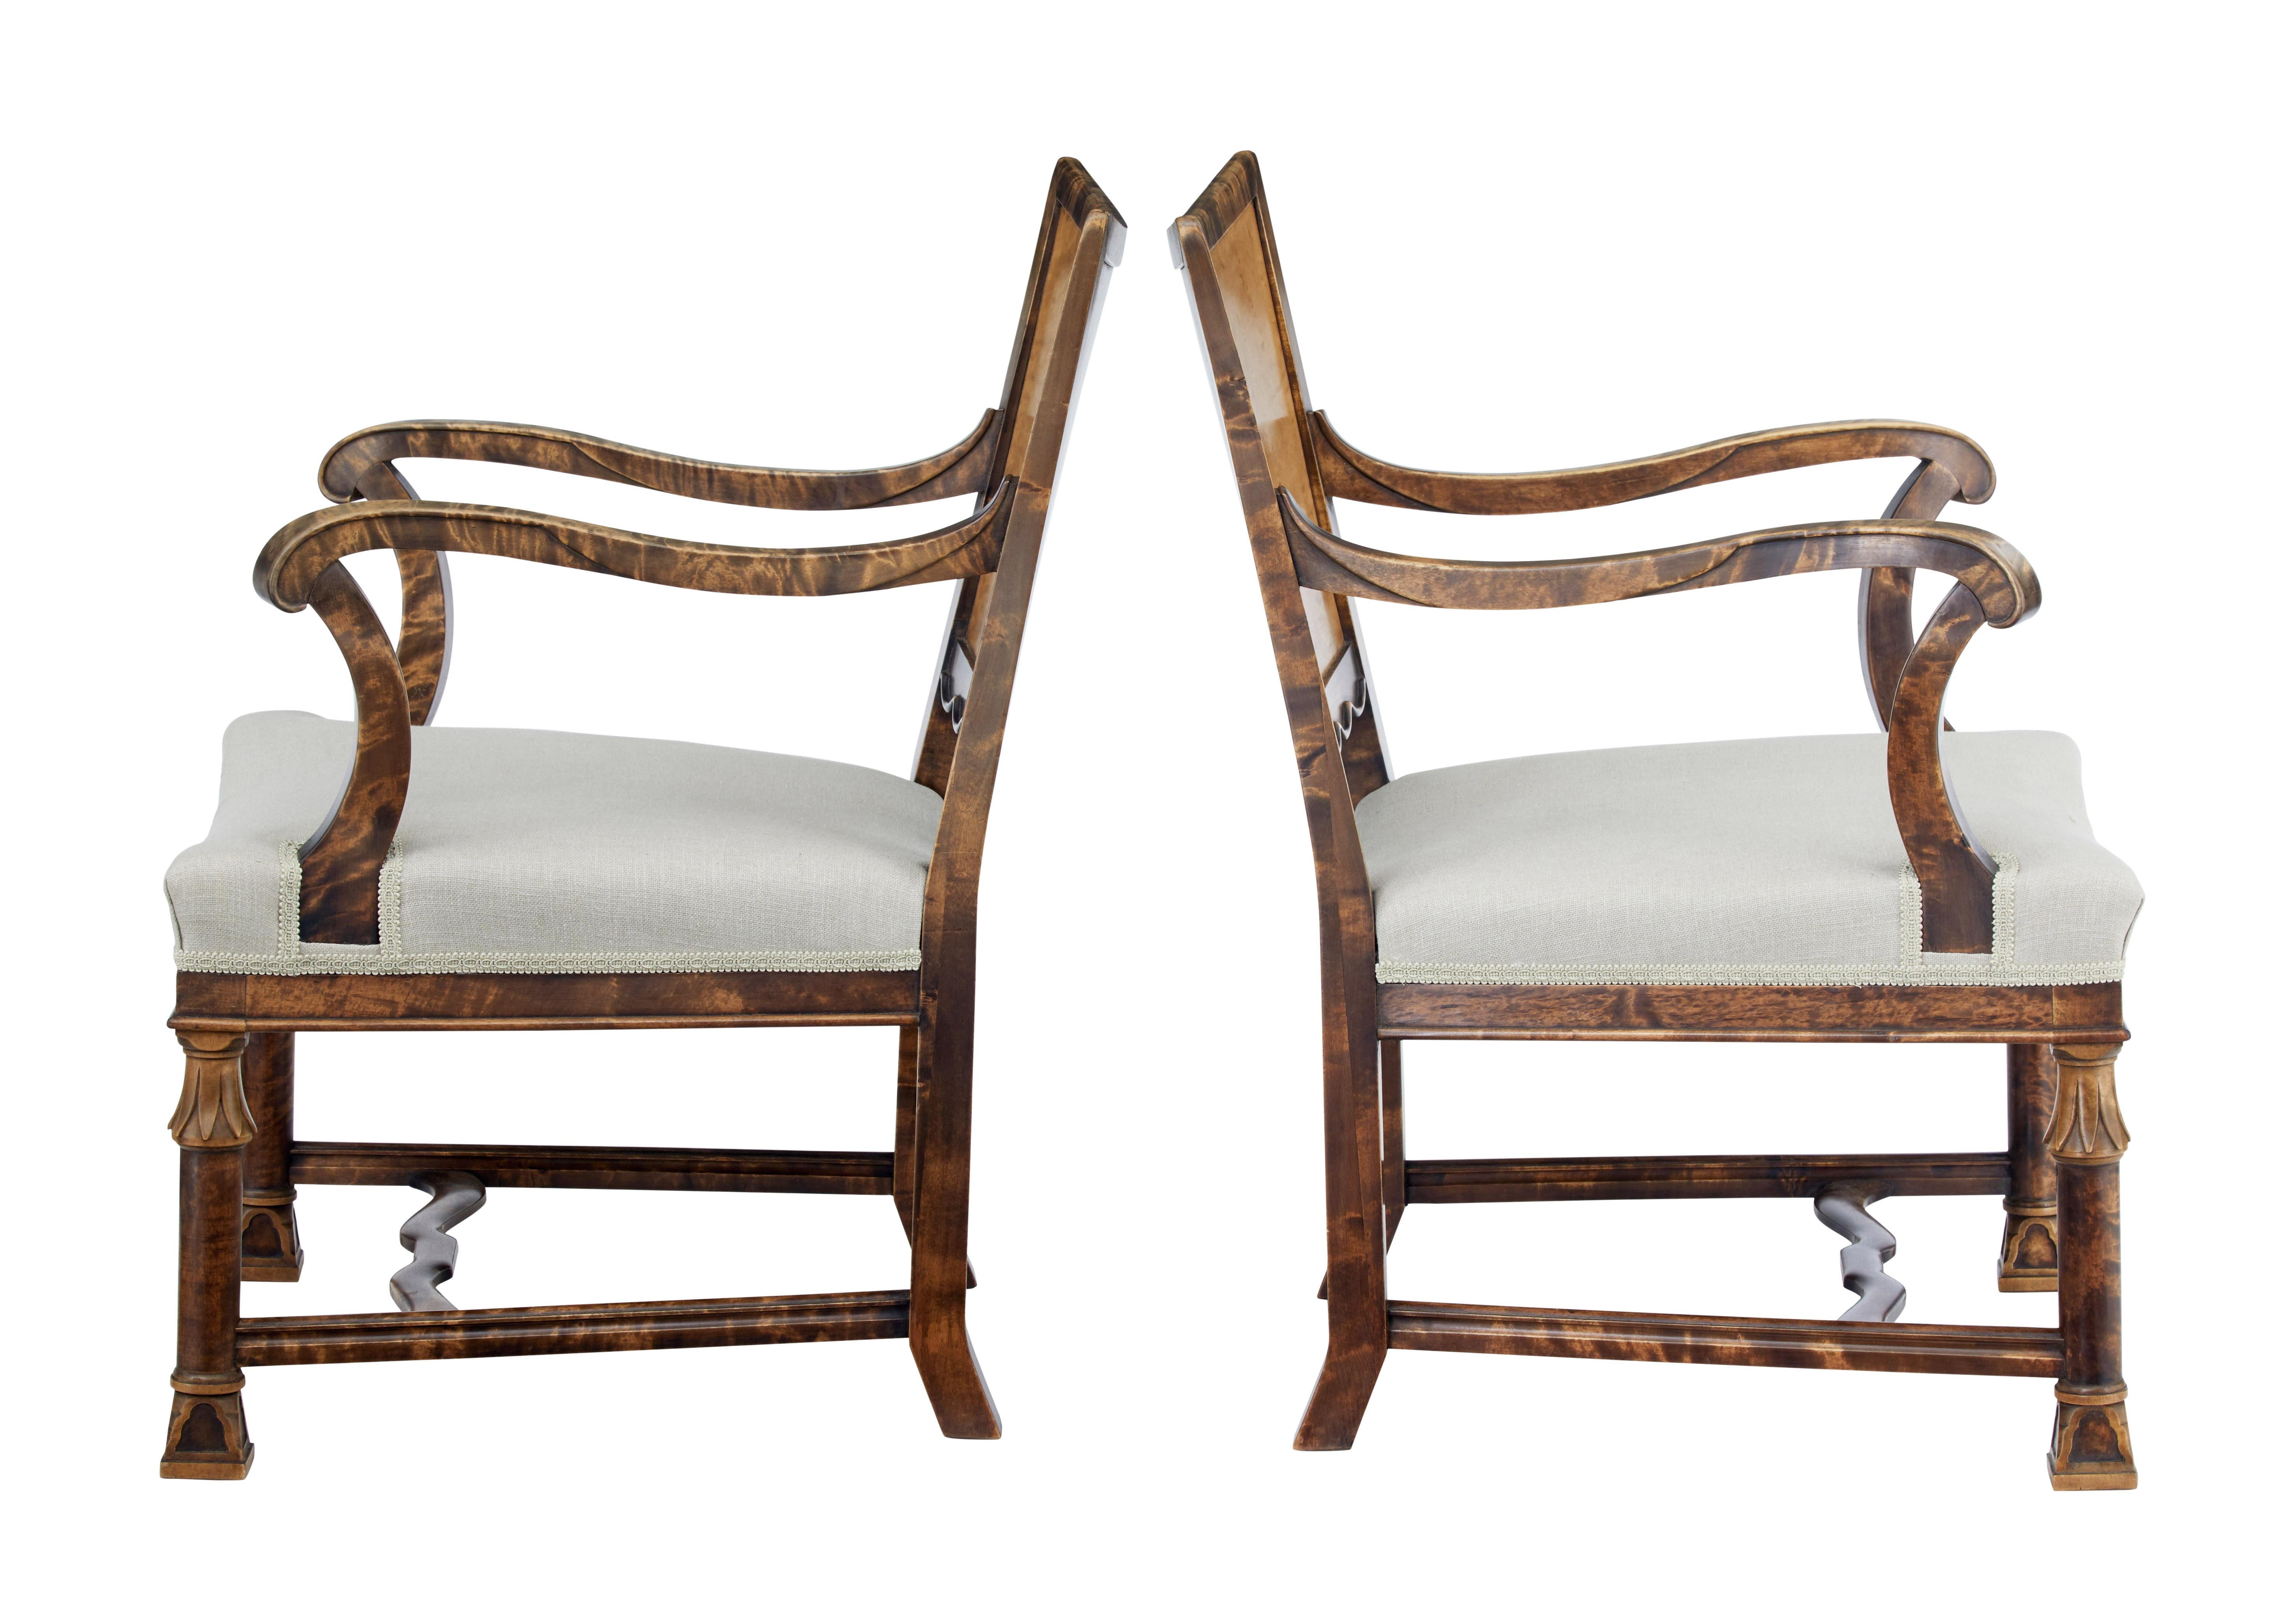 Beautiful pair of Art Deco period Swedish armchairs, circa 1930.

Shaped backs with inlaid walnut fleur de lis in the lower back panel. Scrolled arms with carved detail to the sides. Recently upholstered in plain fabric with braid edging. Standing